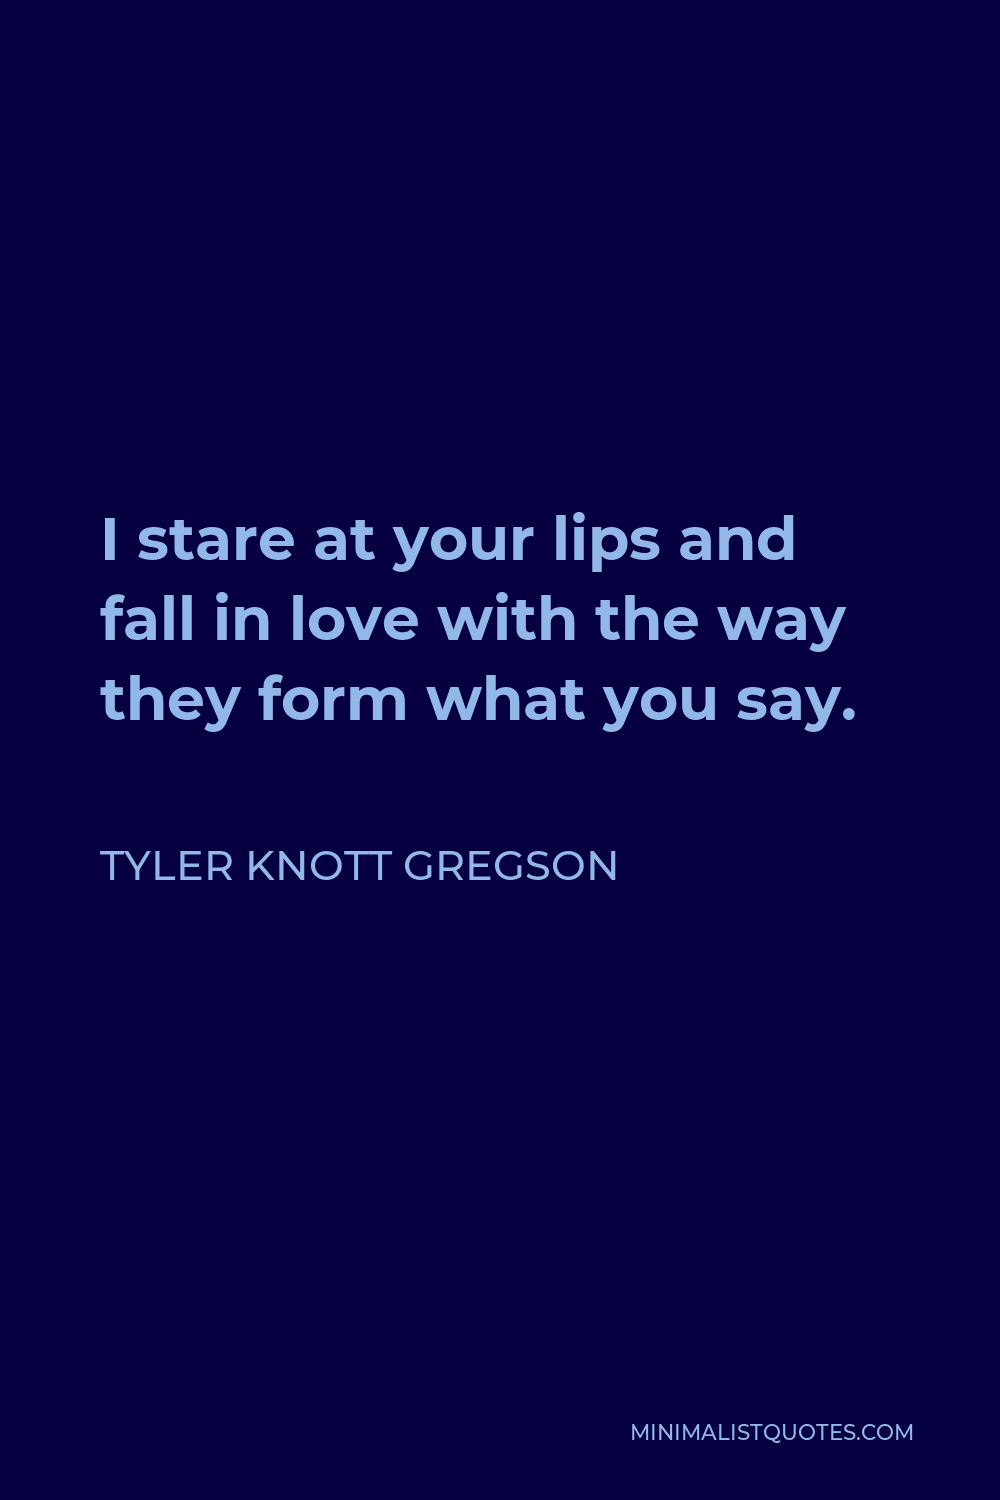 Tyler Knott Gregson Quote - I stare at your lips and fall in love with the way they form what you say.